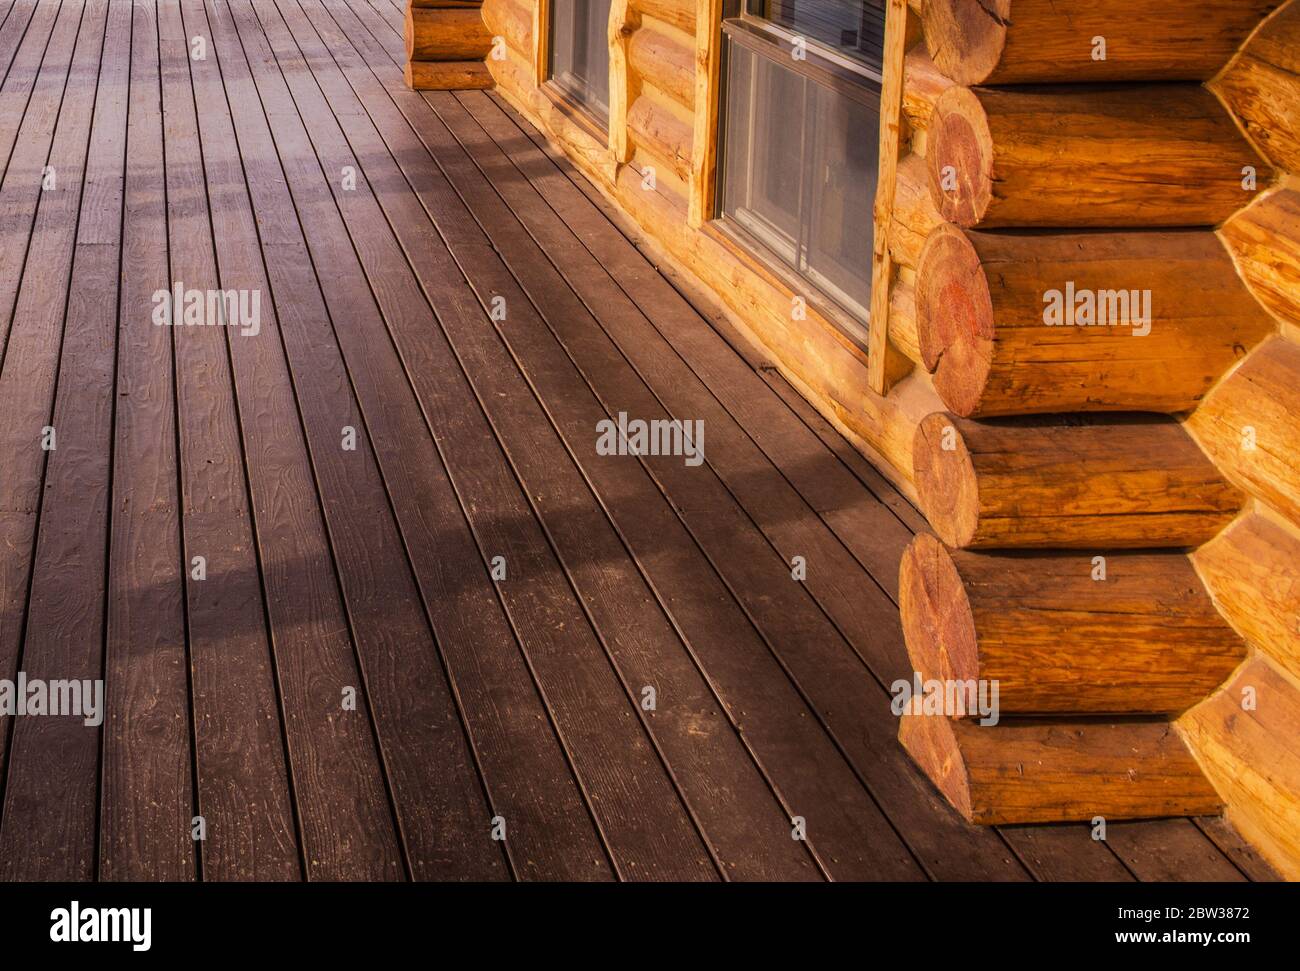 Close Up Photo of Log Home Cabin and Wooden Porch Floor. Wooden Homes Building Theme. Stock Photo